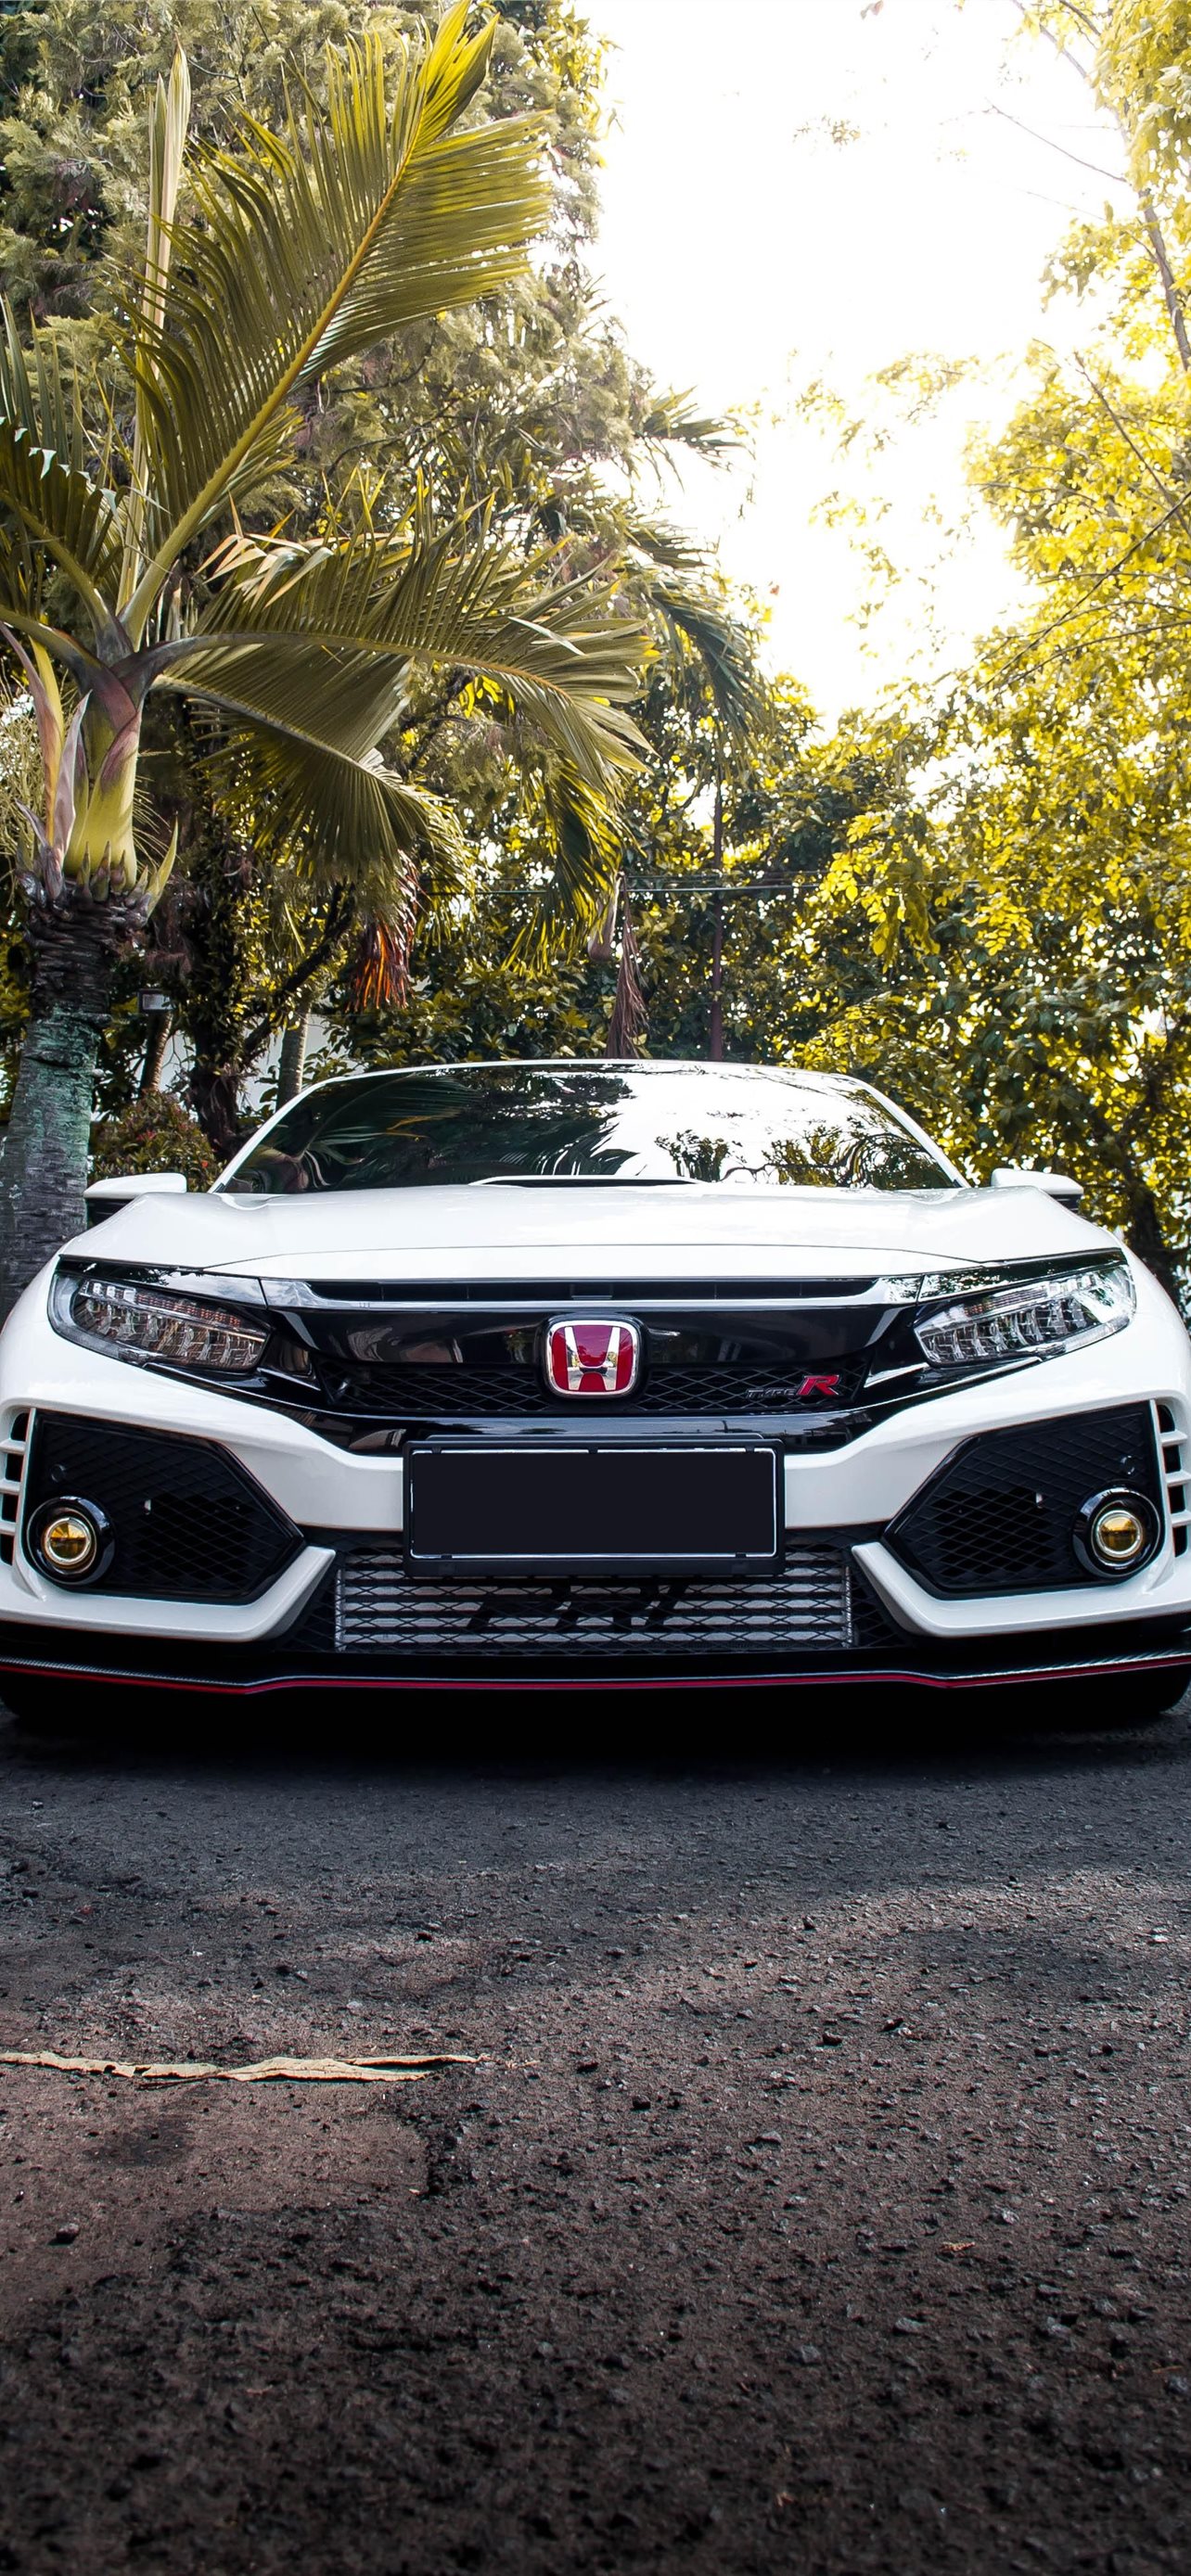 Download wallpaper 1350x2400 honda civic si black front view city  iphone 876s6 for parallax hd backgroun  Honda civic si Honda  civic car Honda civic